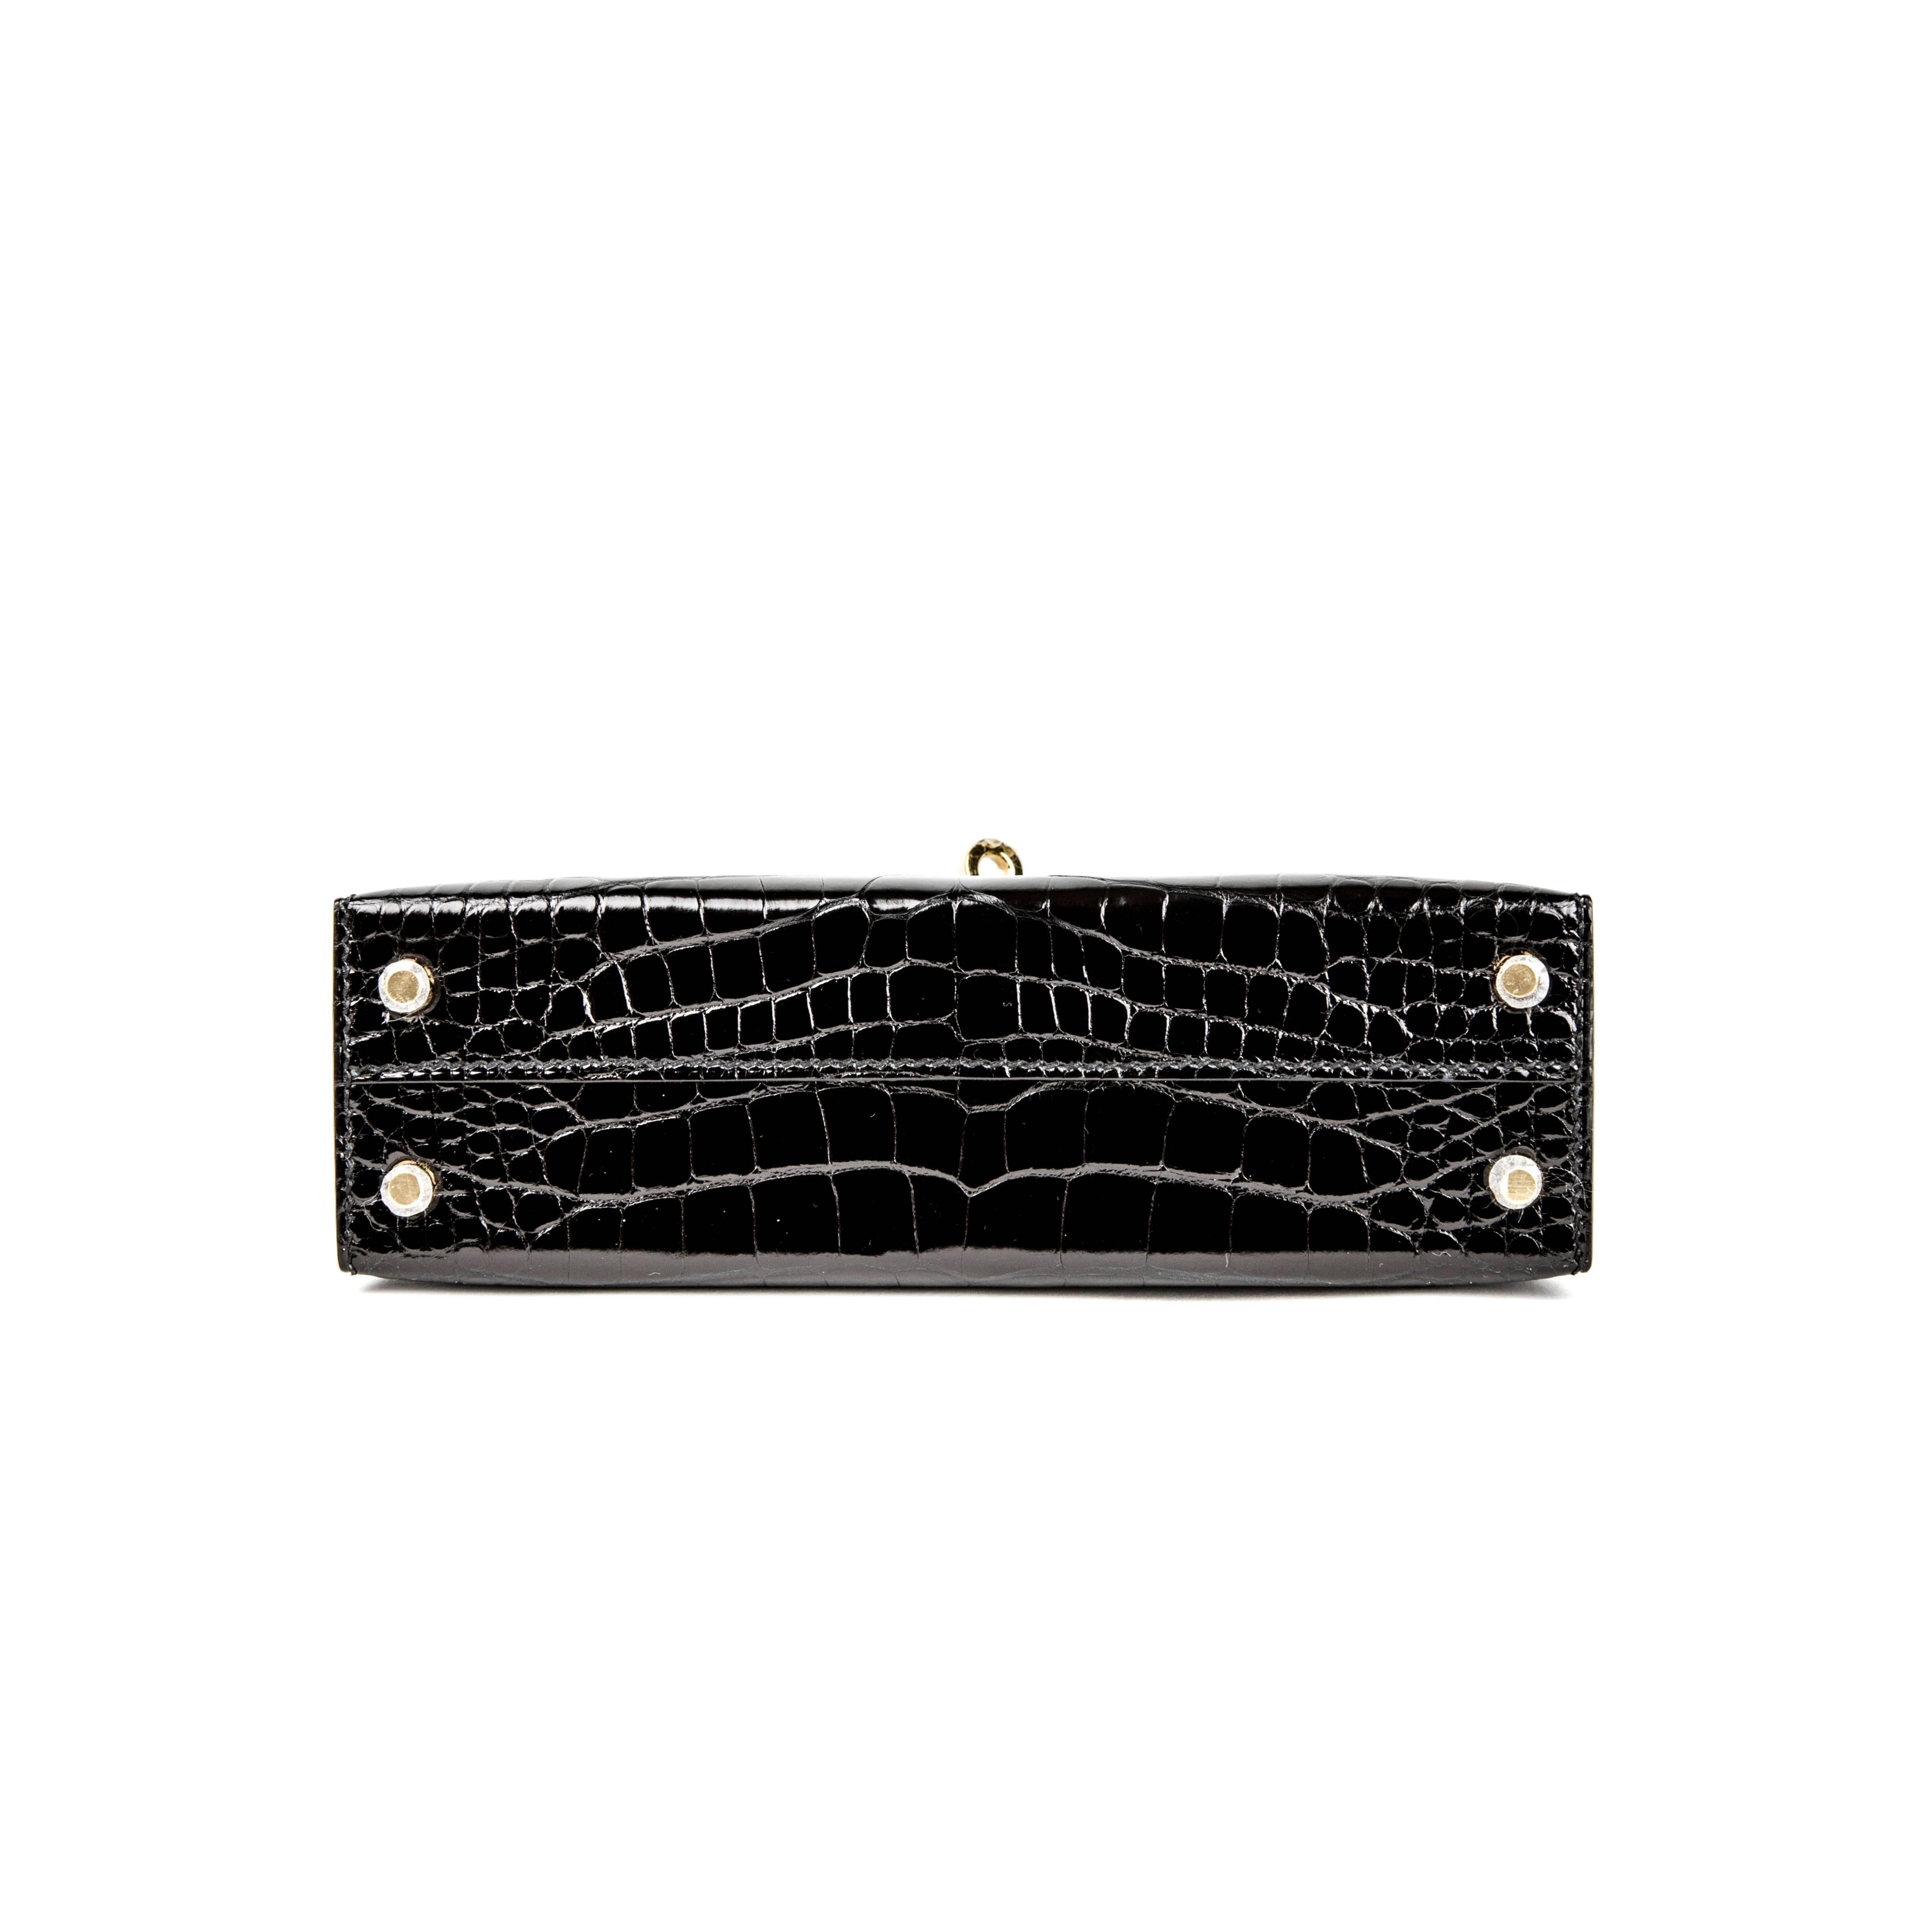 Hermes Kelly 20 Noir (Black) in Croco Leather Gold Hardware (GHW) Stamp A (2017) For Sale 2